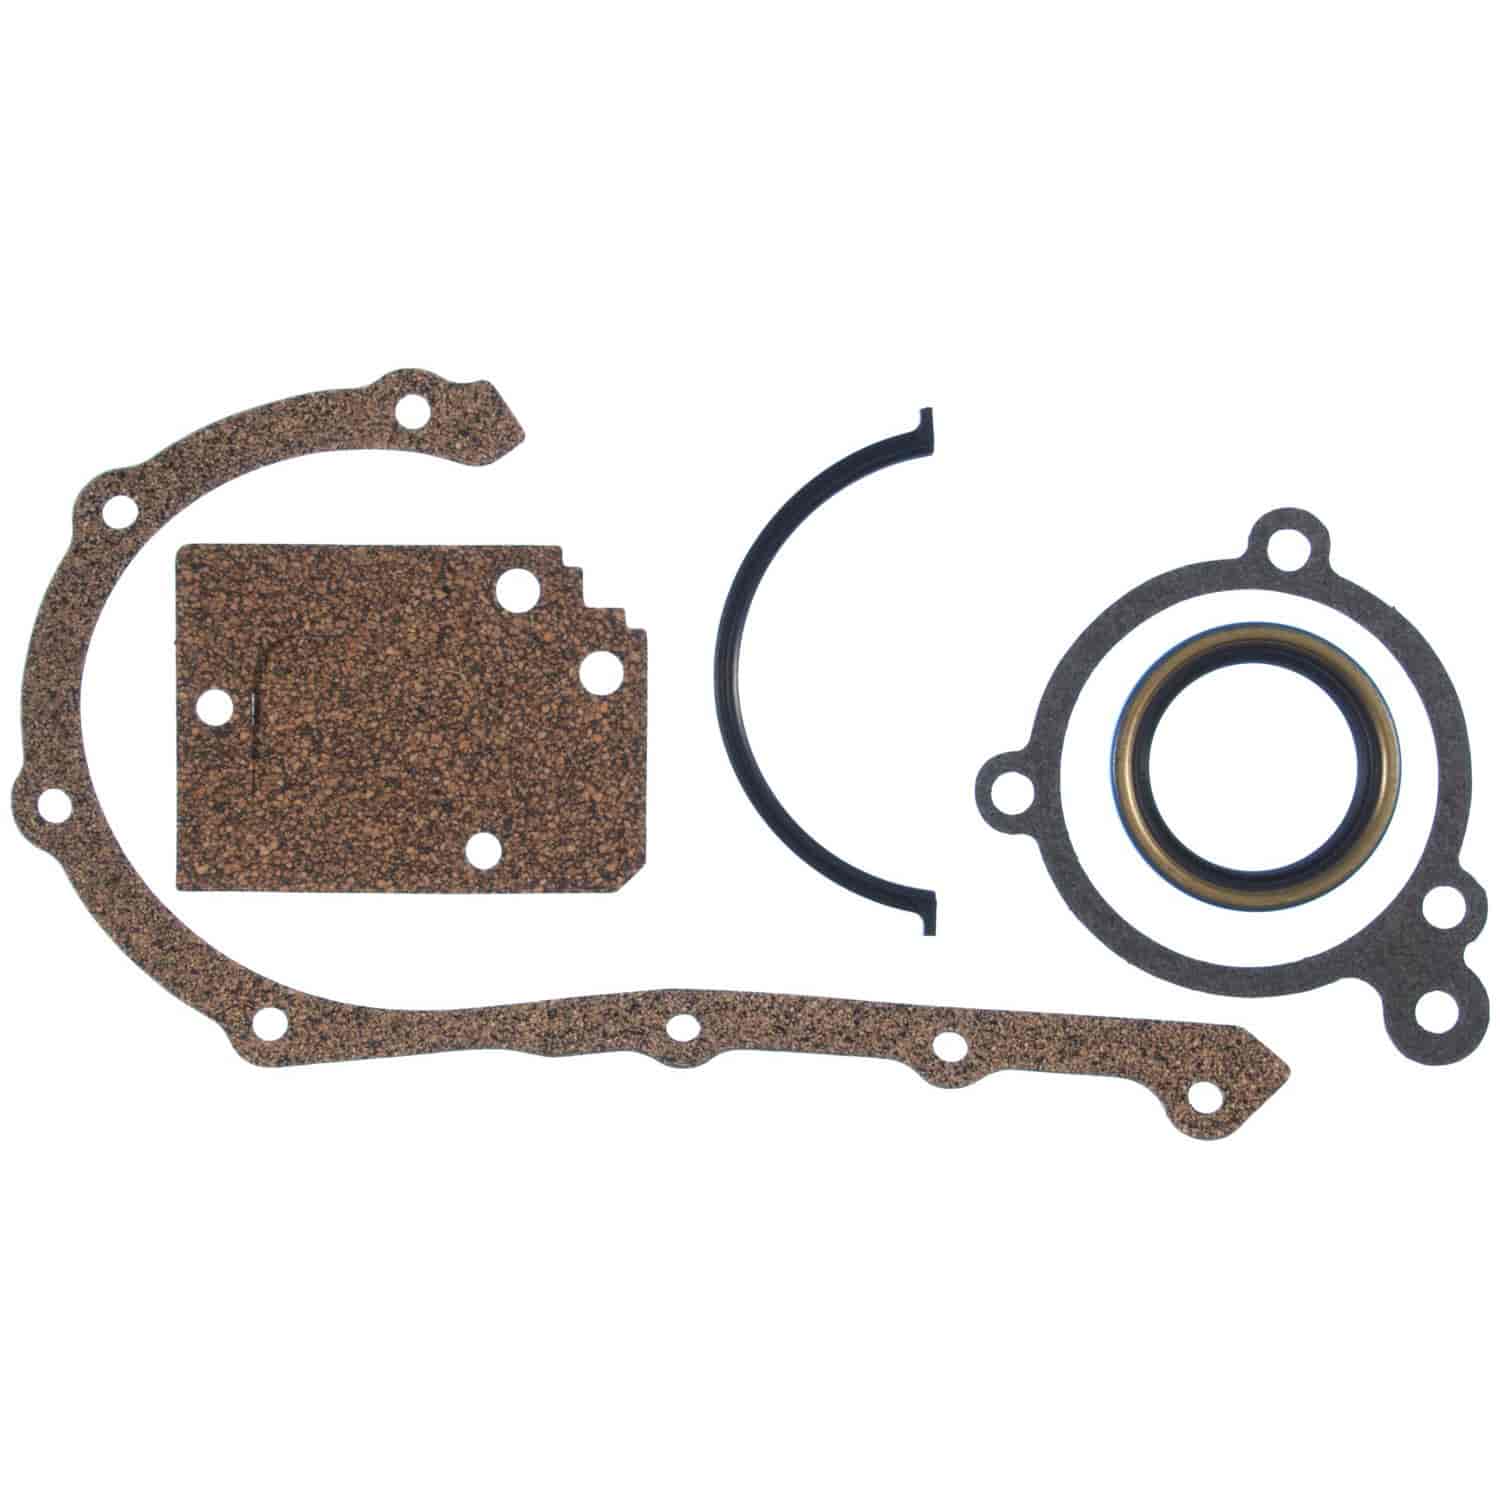 Timing Cover Set Ford-Pass Trk&Ind Merc 144 170 200 60-83